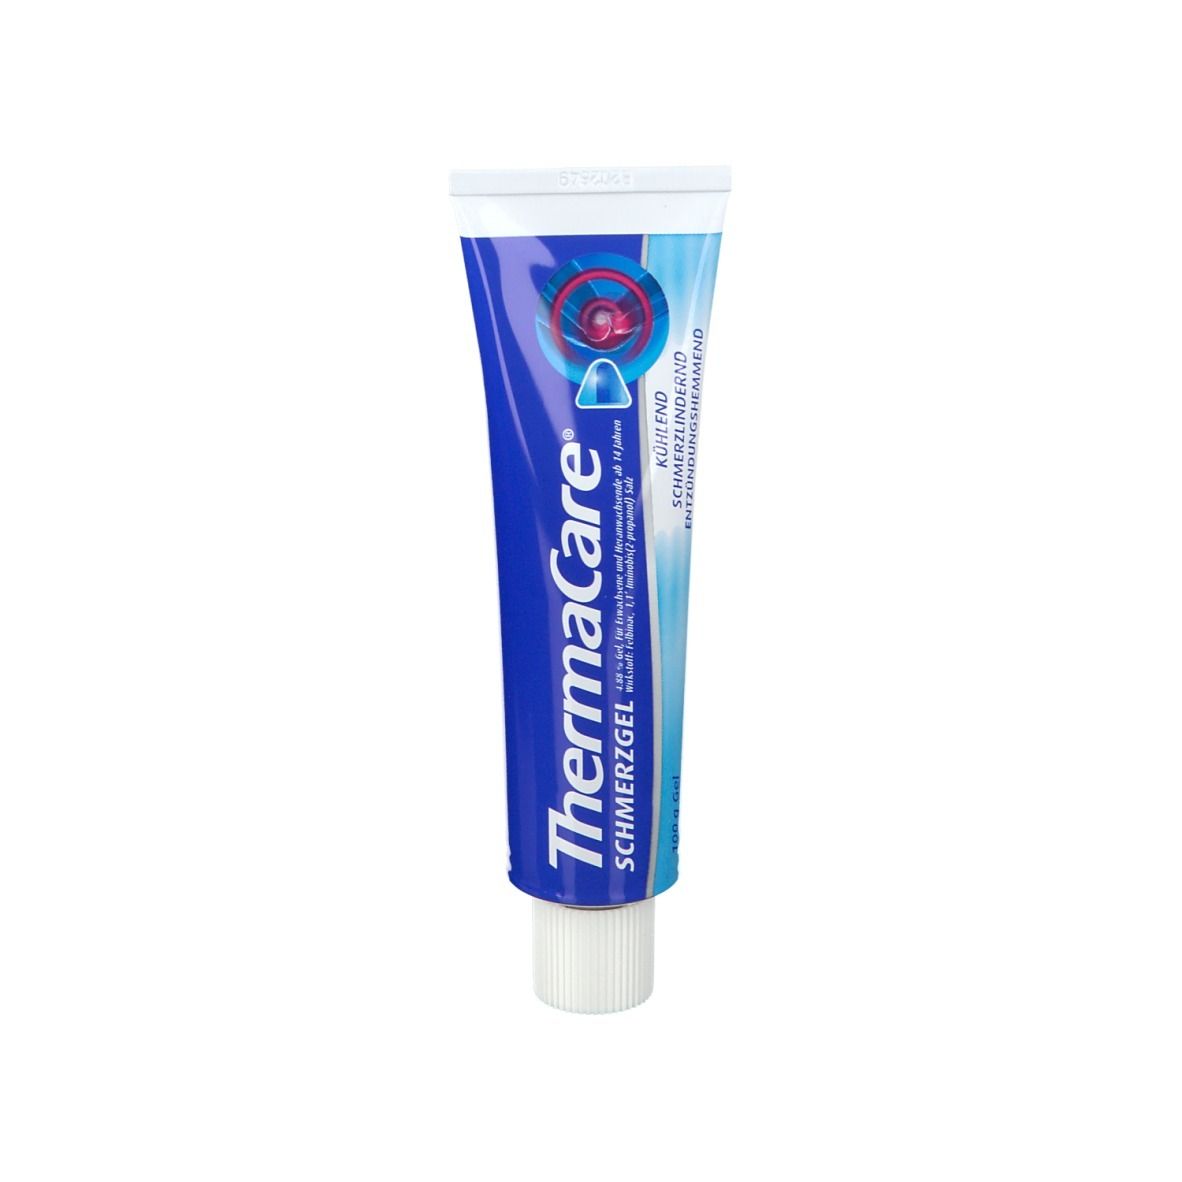 ThermaCare® Schmerzgel